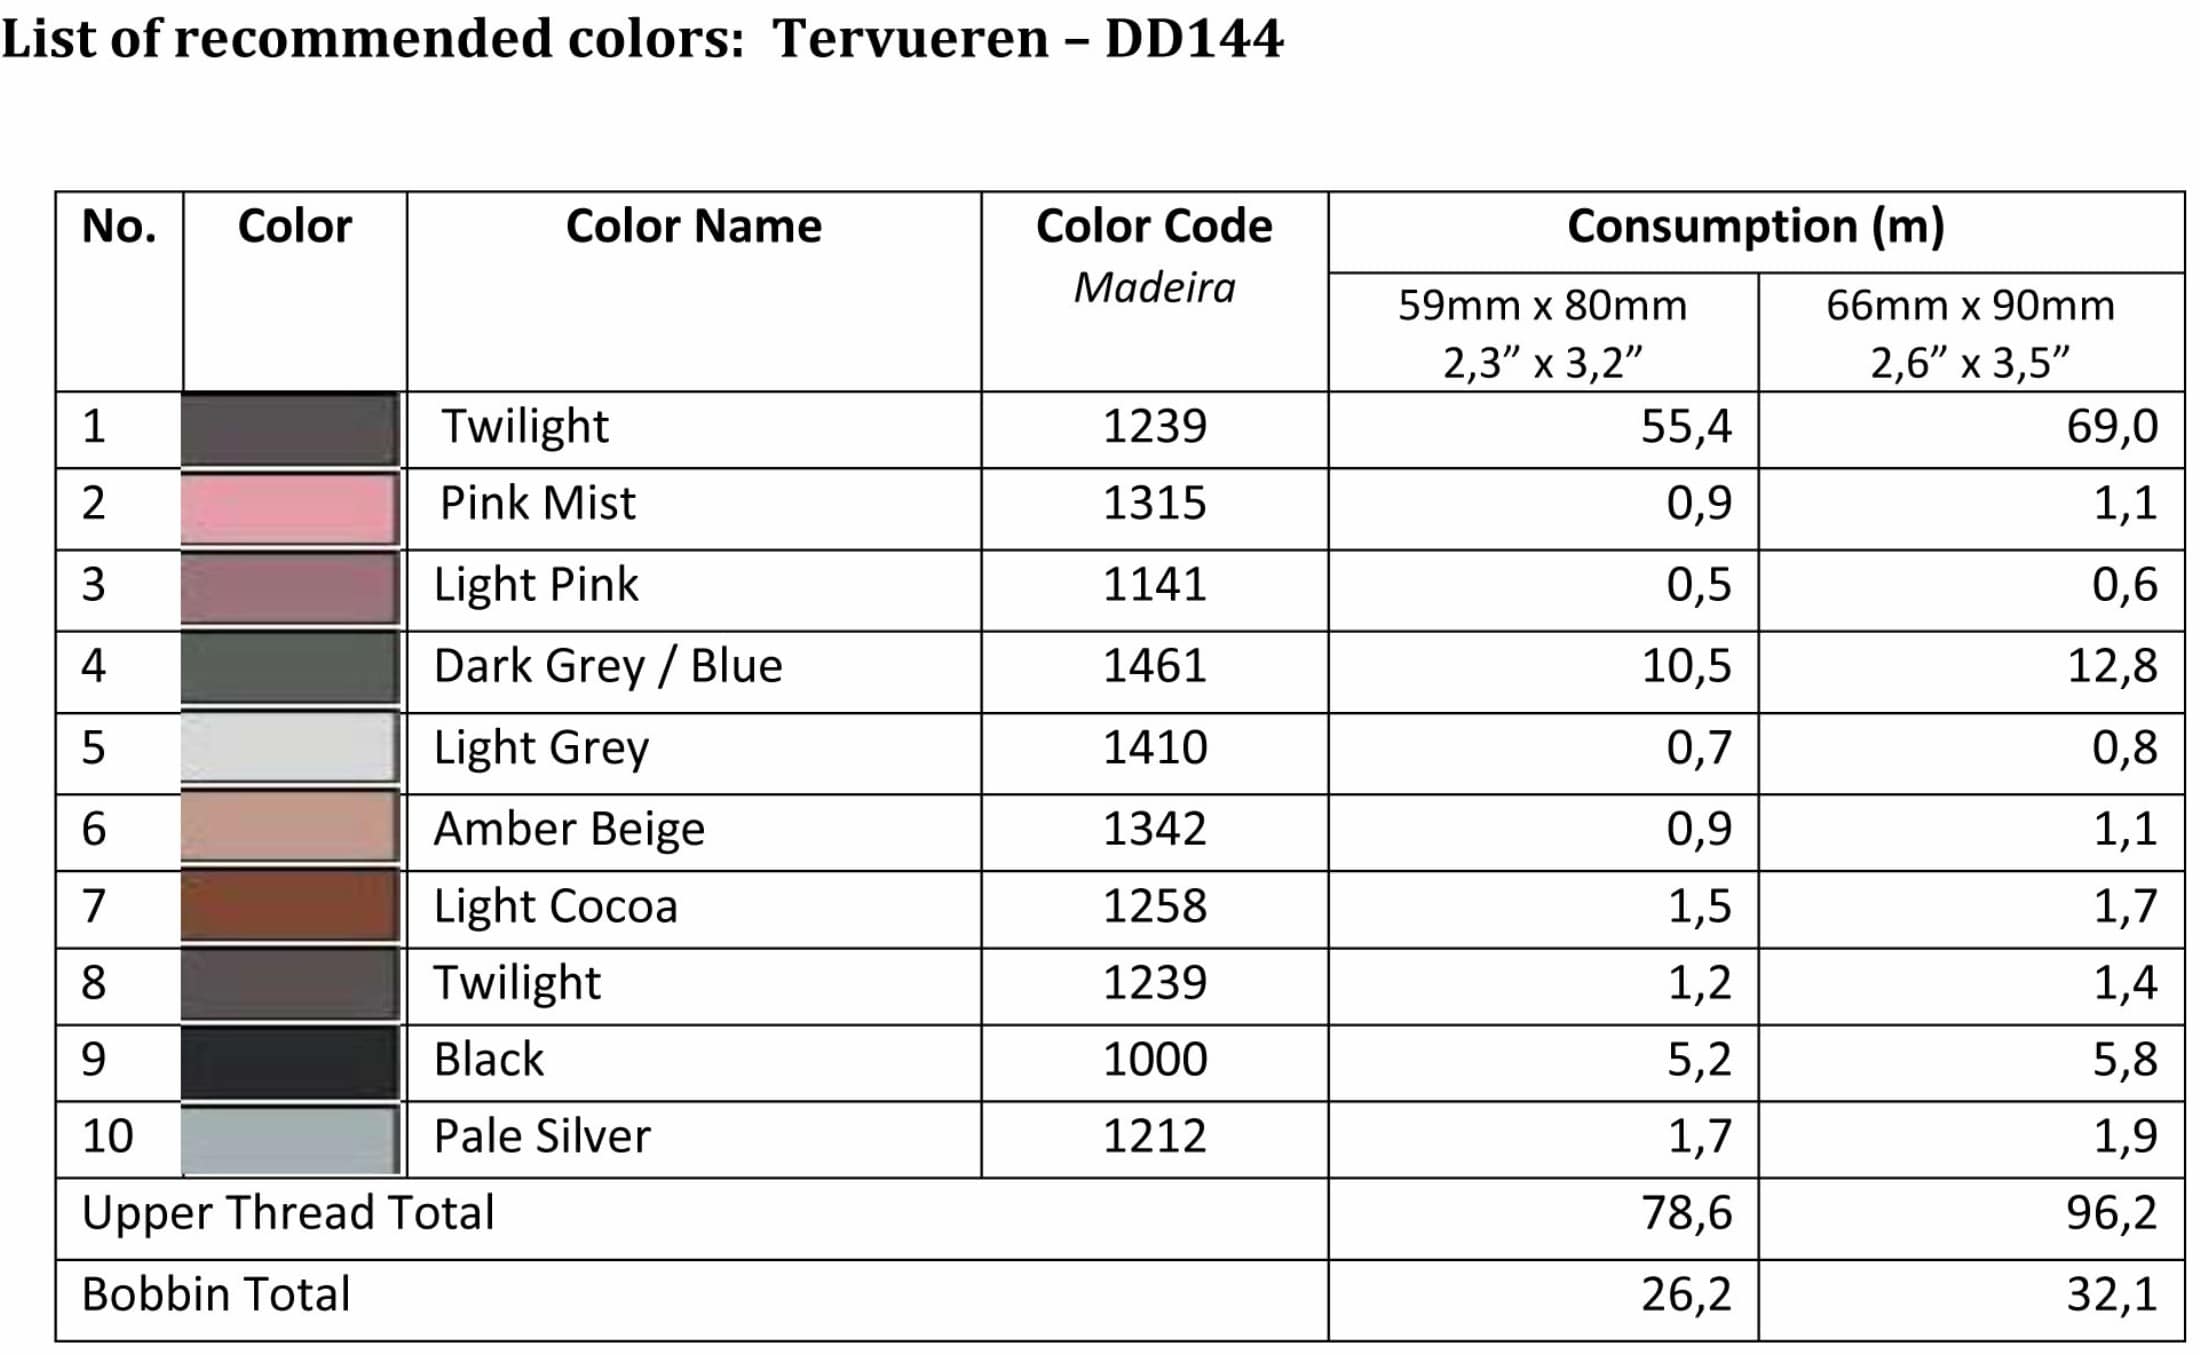 List of recommended colors - LargeDD144